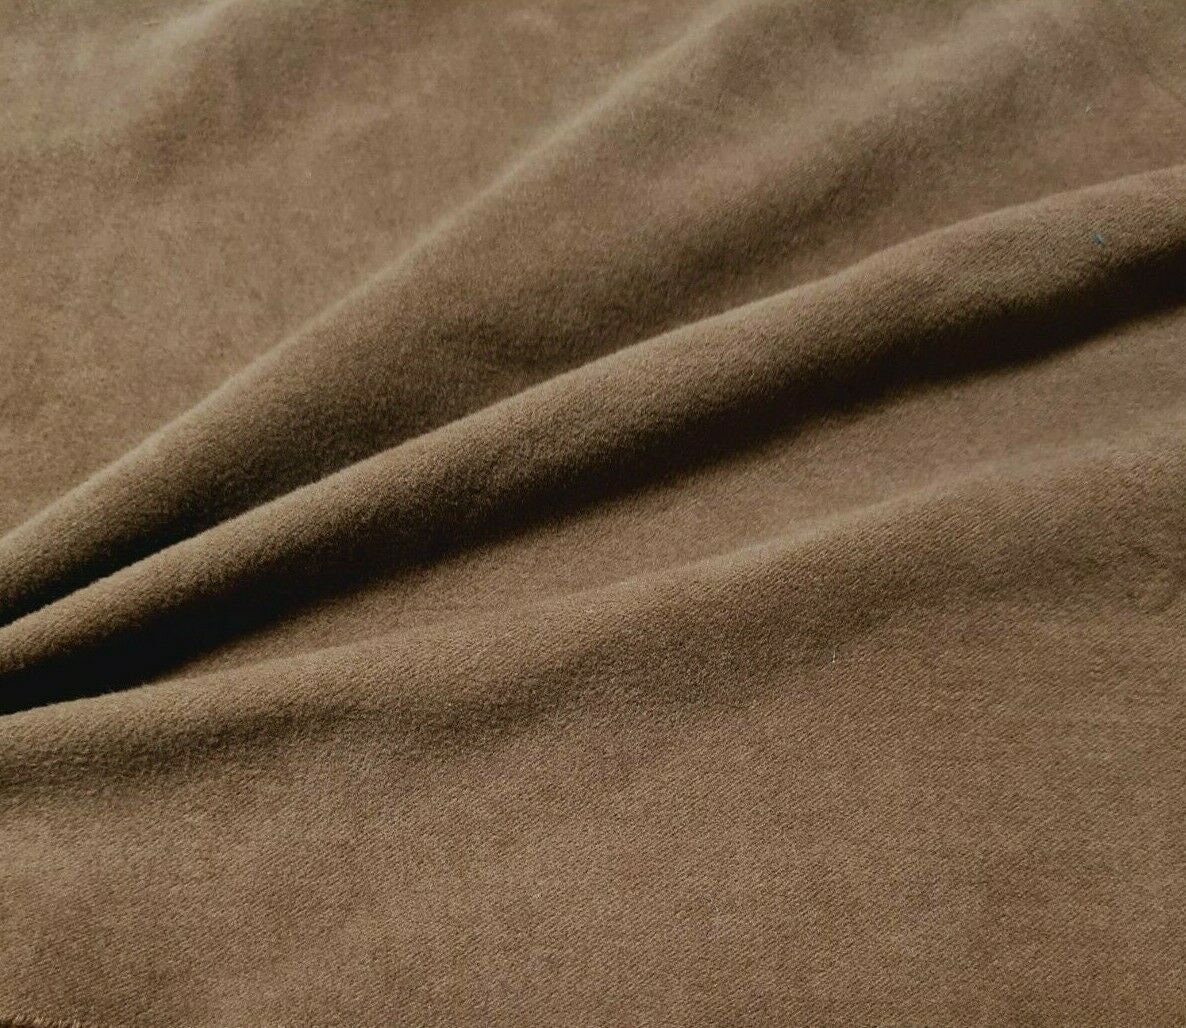 Cotton Fabric Velour Touch Light Brown Colour Sold By The | Etsy